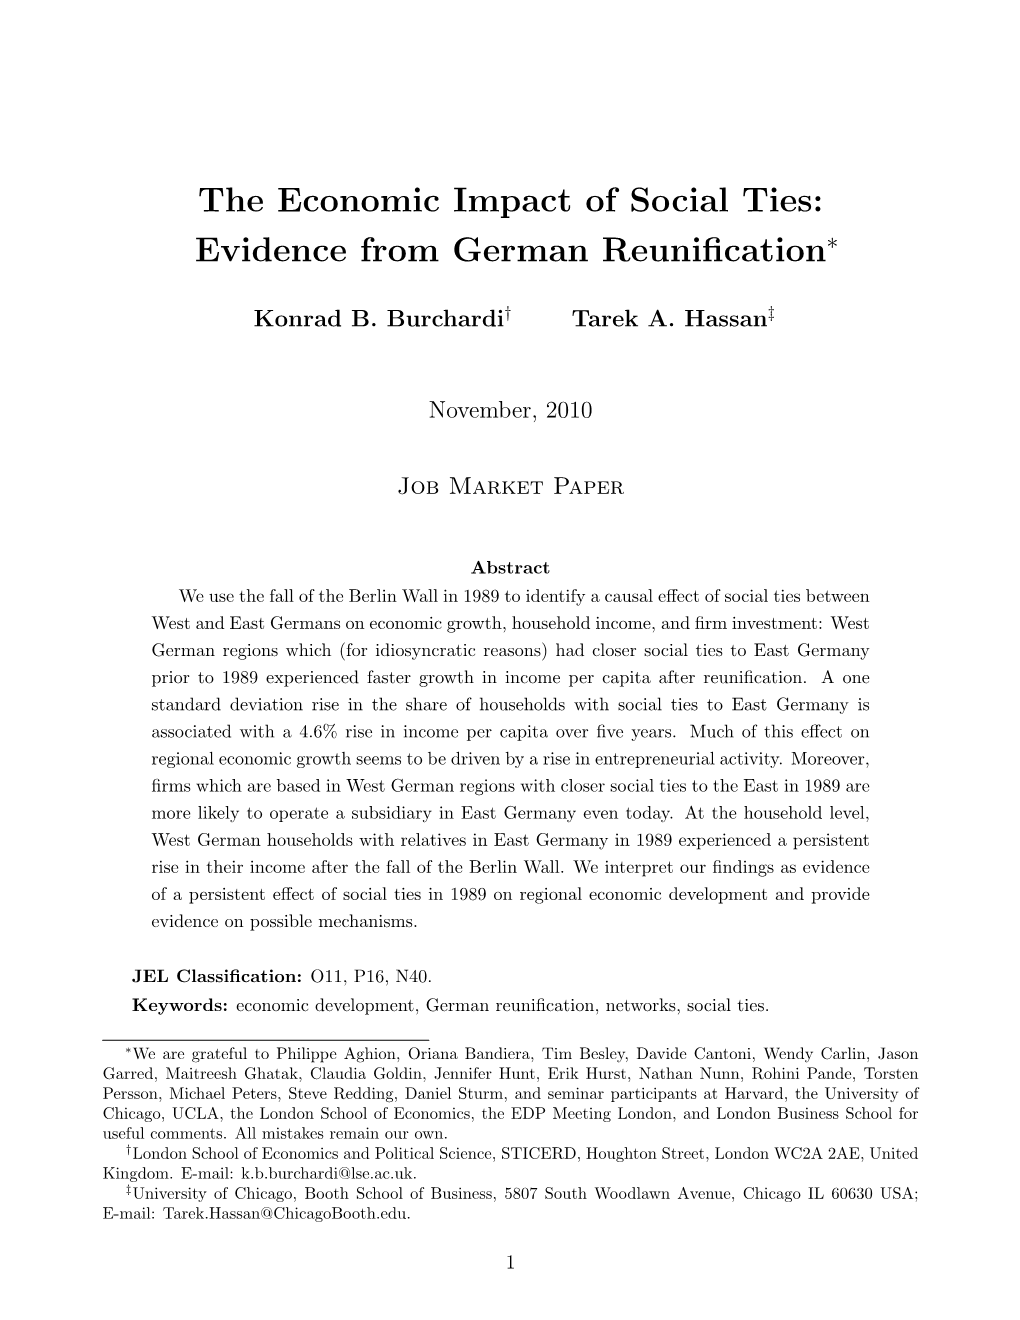 The Economic Impact of Social Ties: Evidence from German Reunification